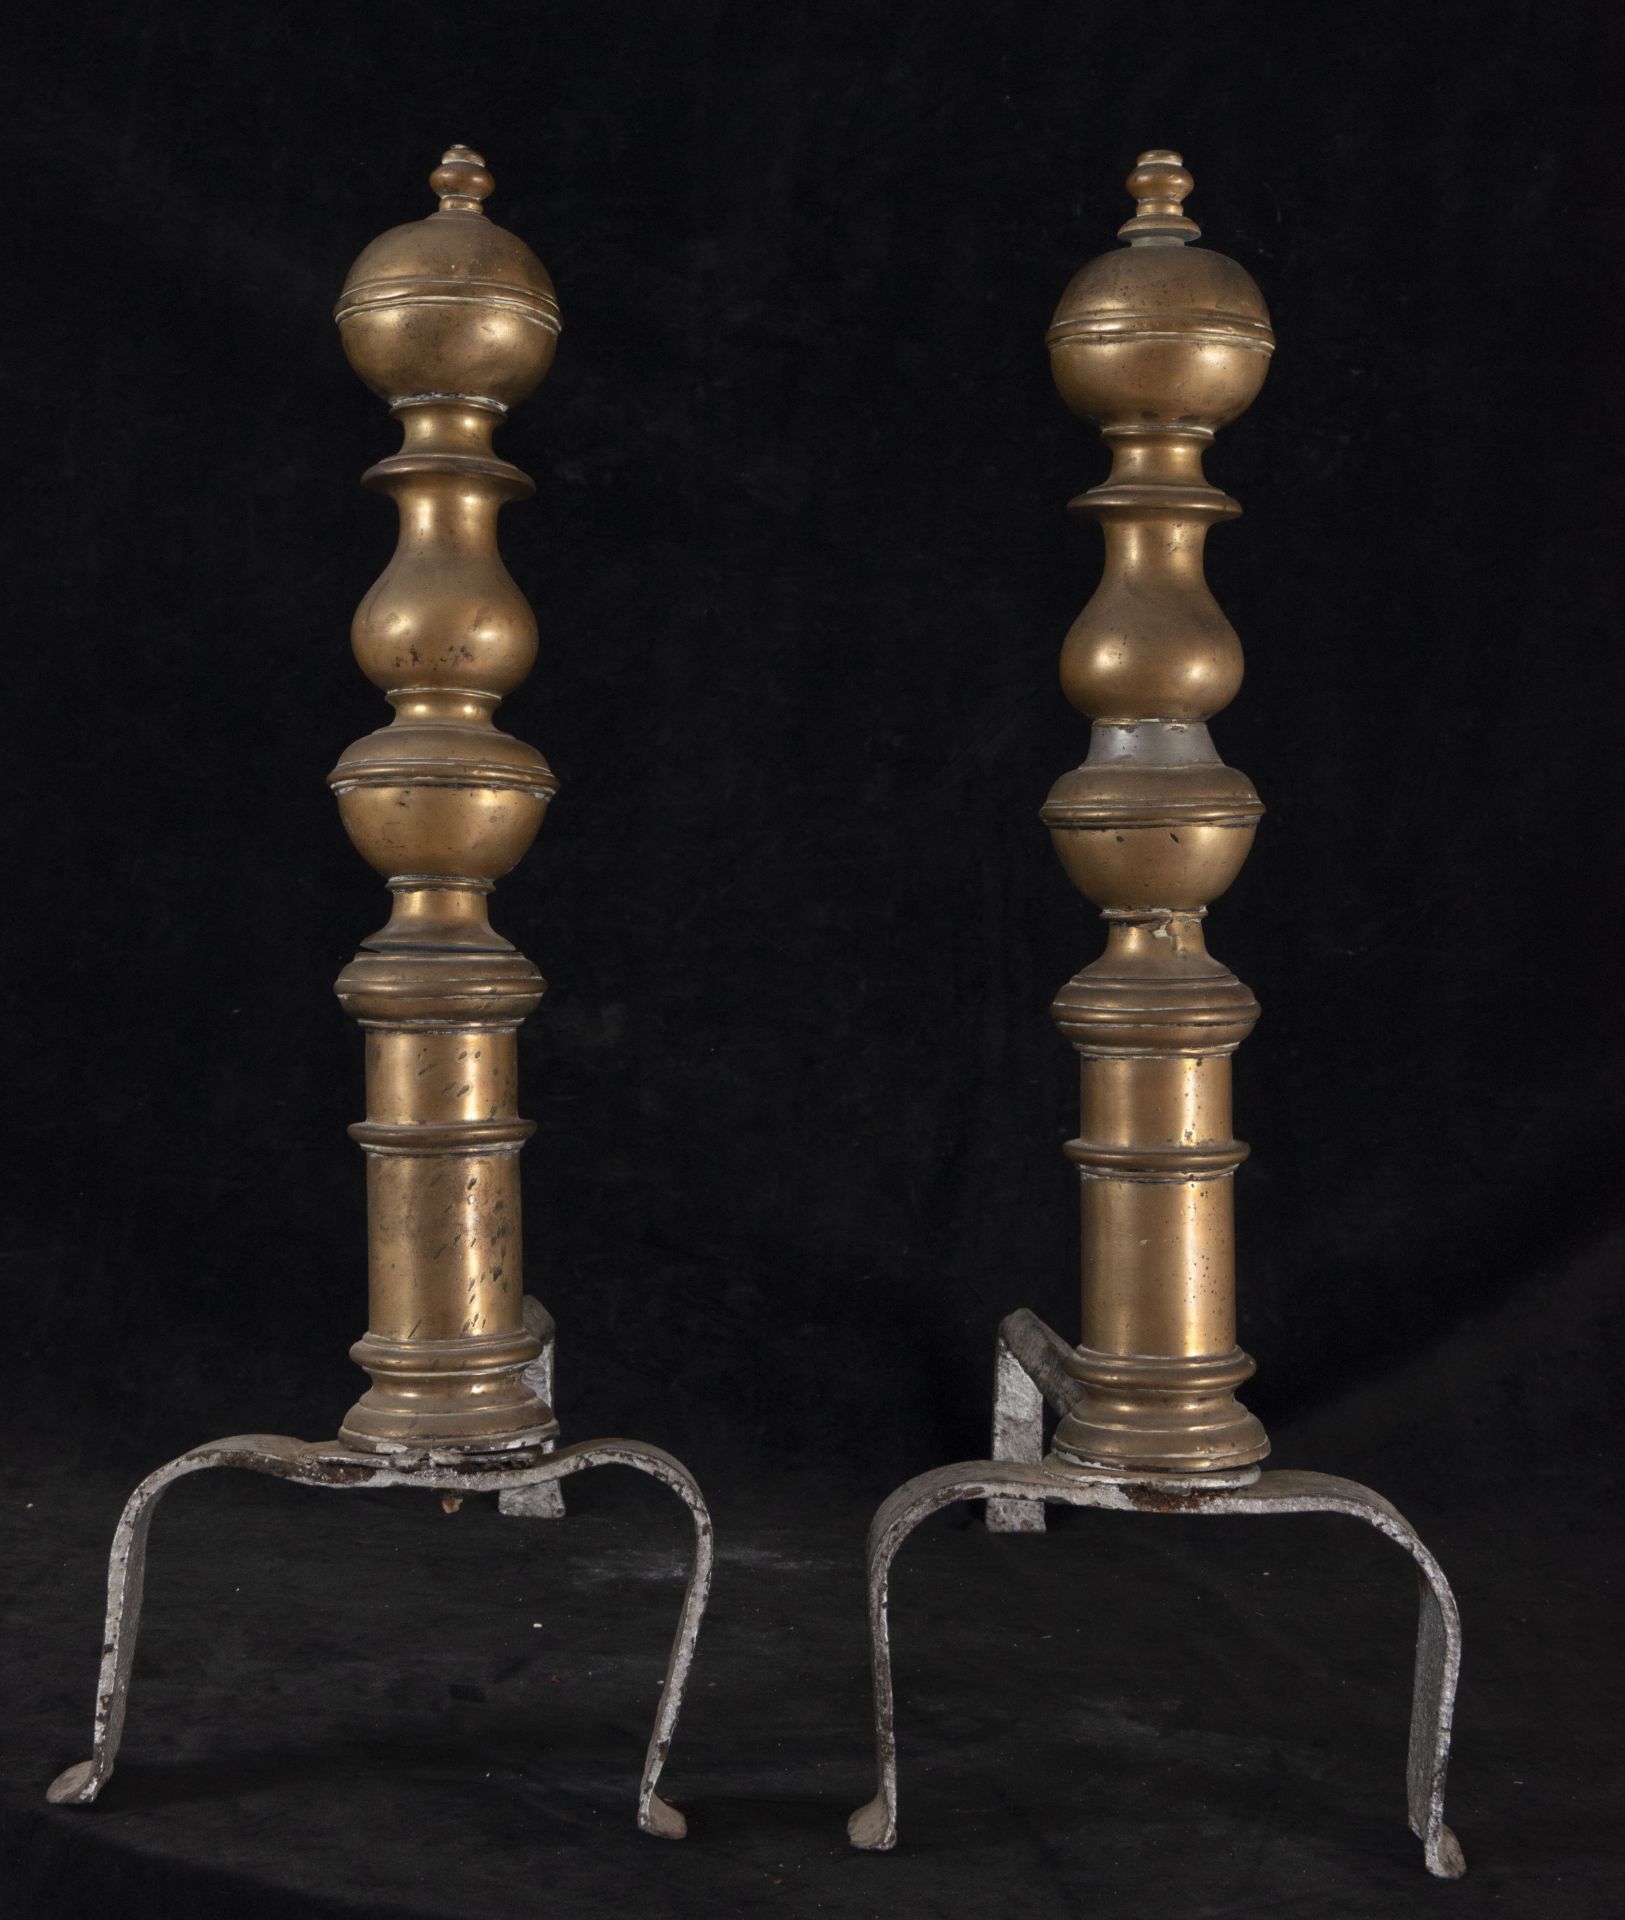 Pair of Important Portuguese or Spanish Andirons for fireplace in late bronze style - Plateresque tr